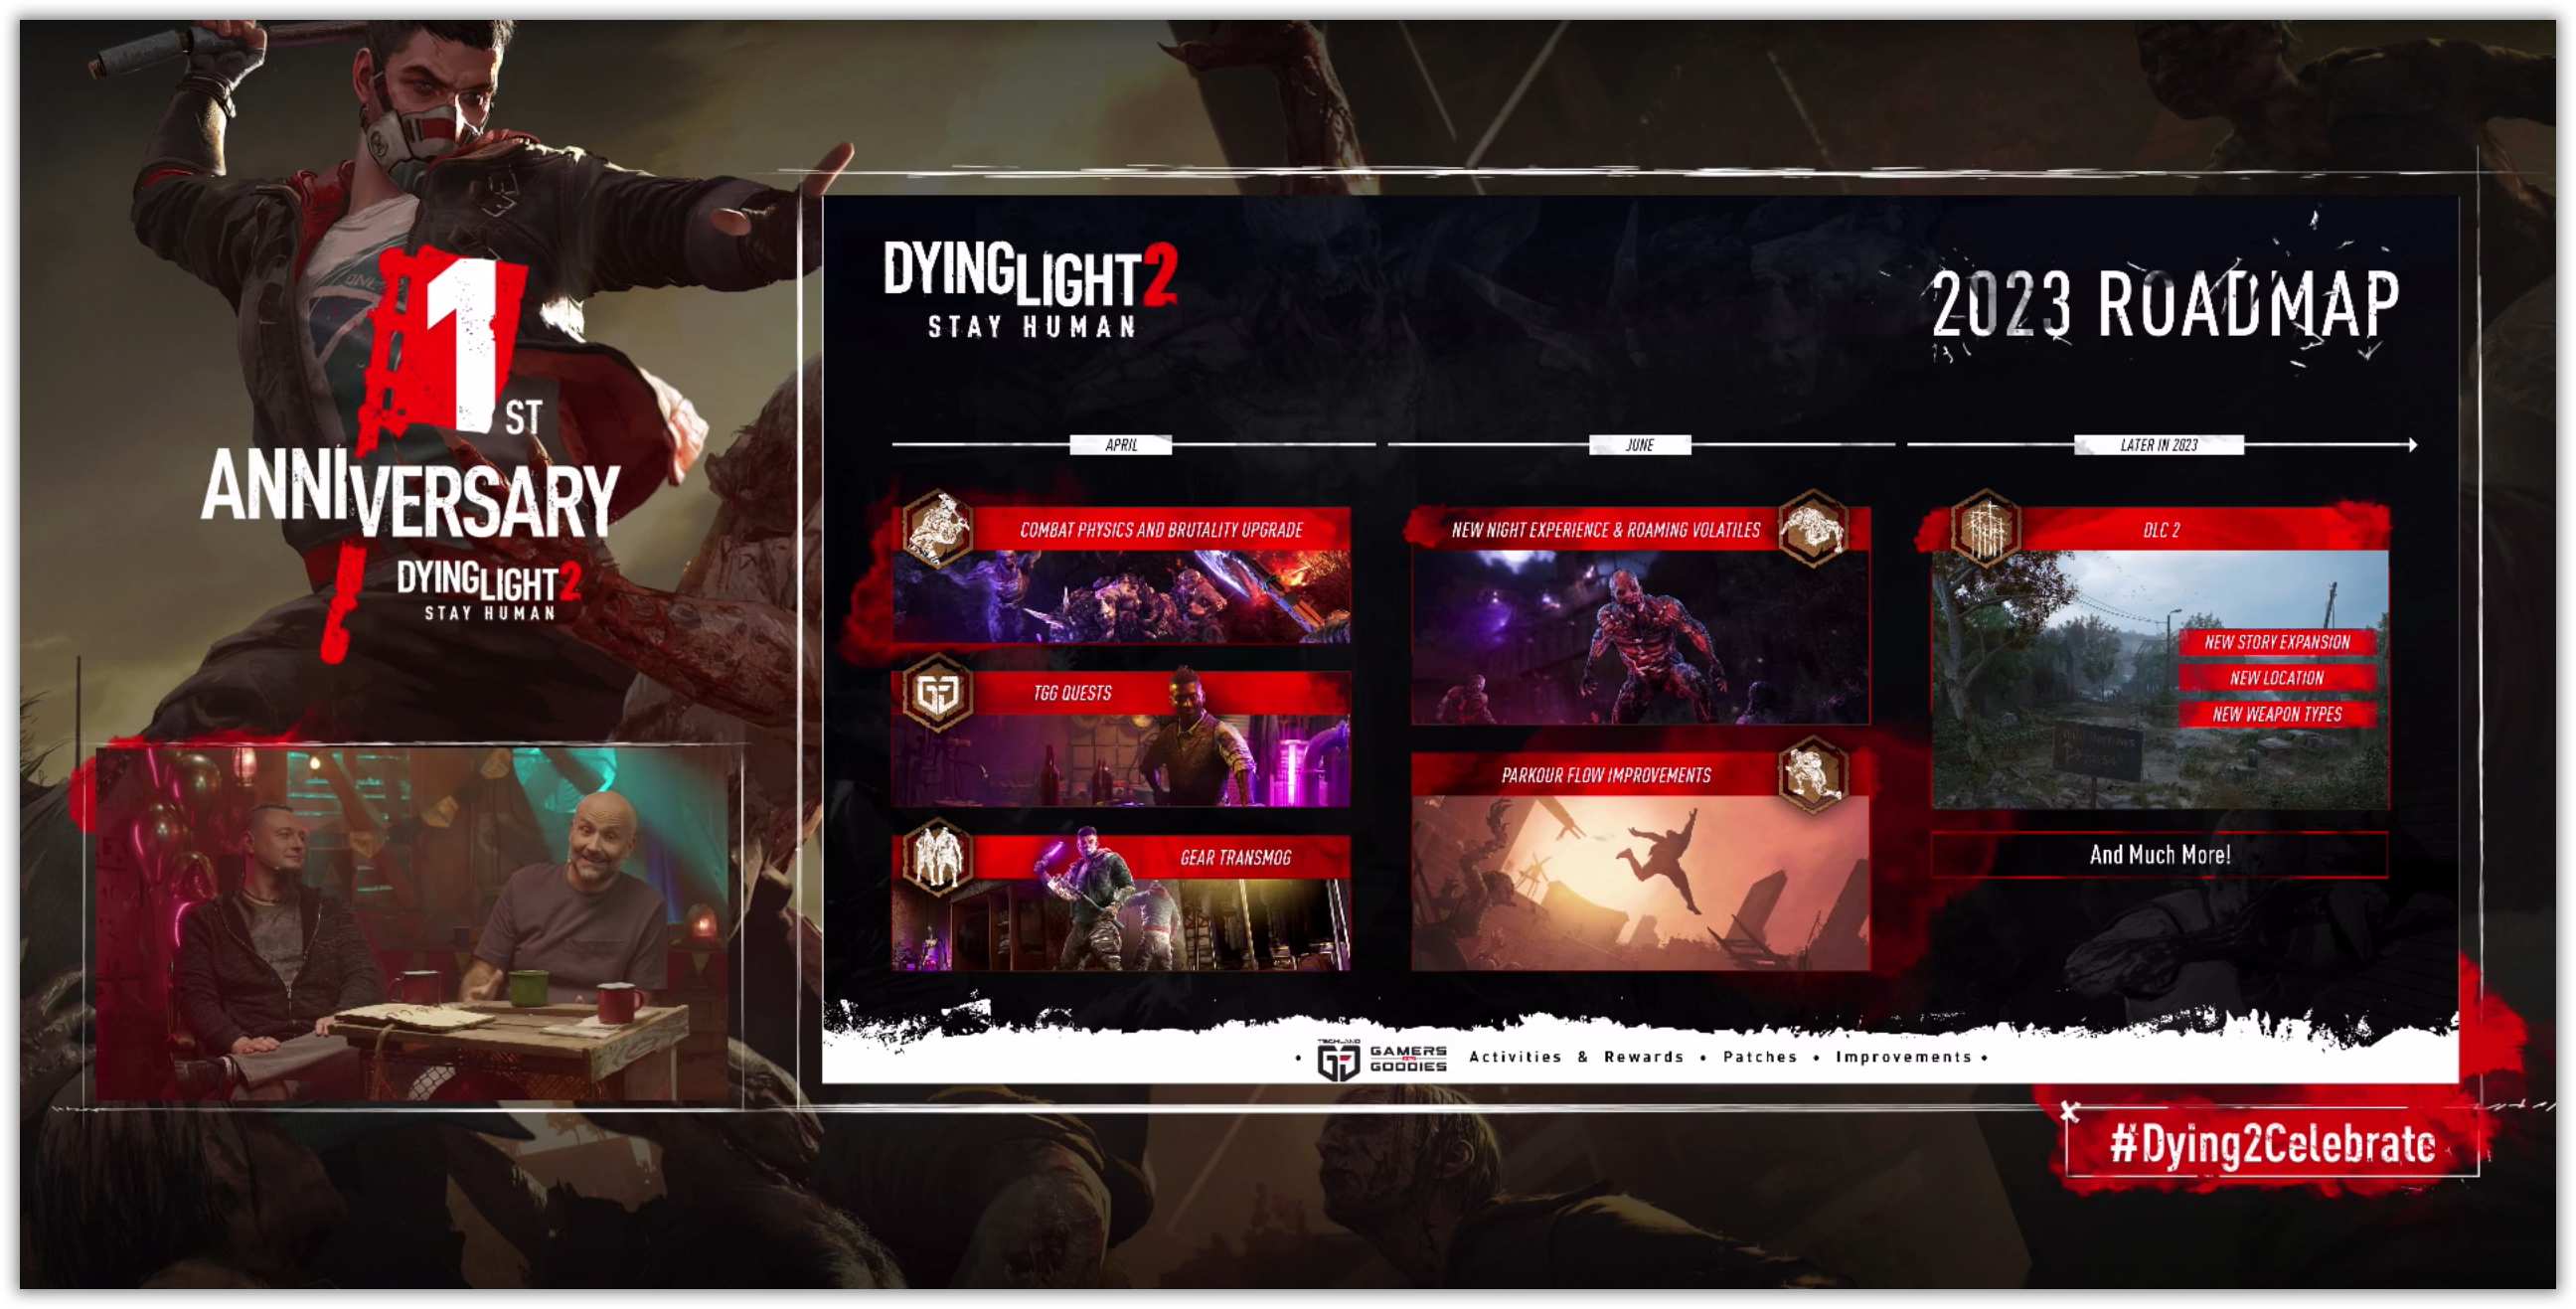 Steam is required in order to play dying light перевод фото 116